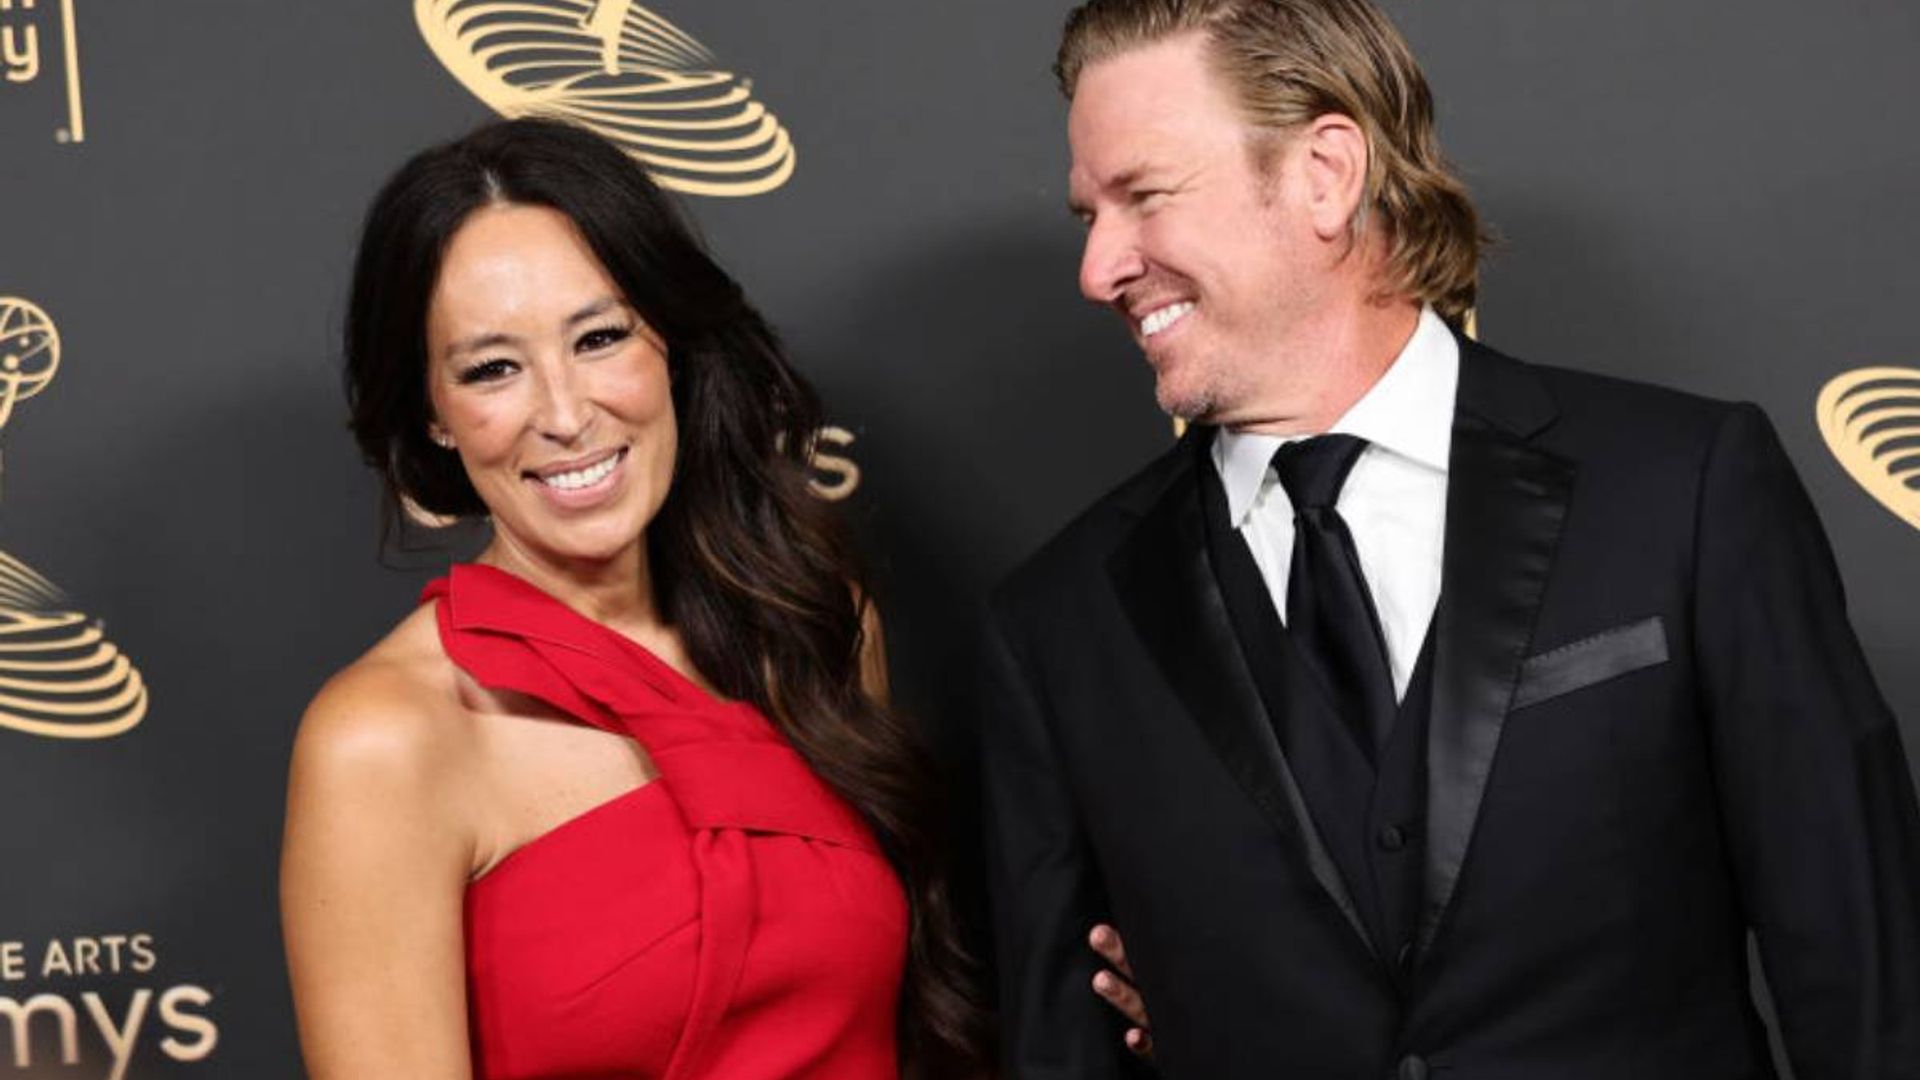 joanna gaines chip love story